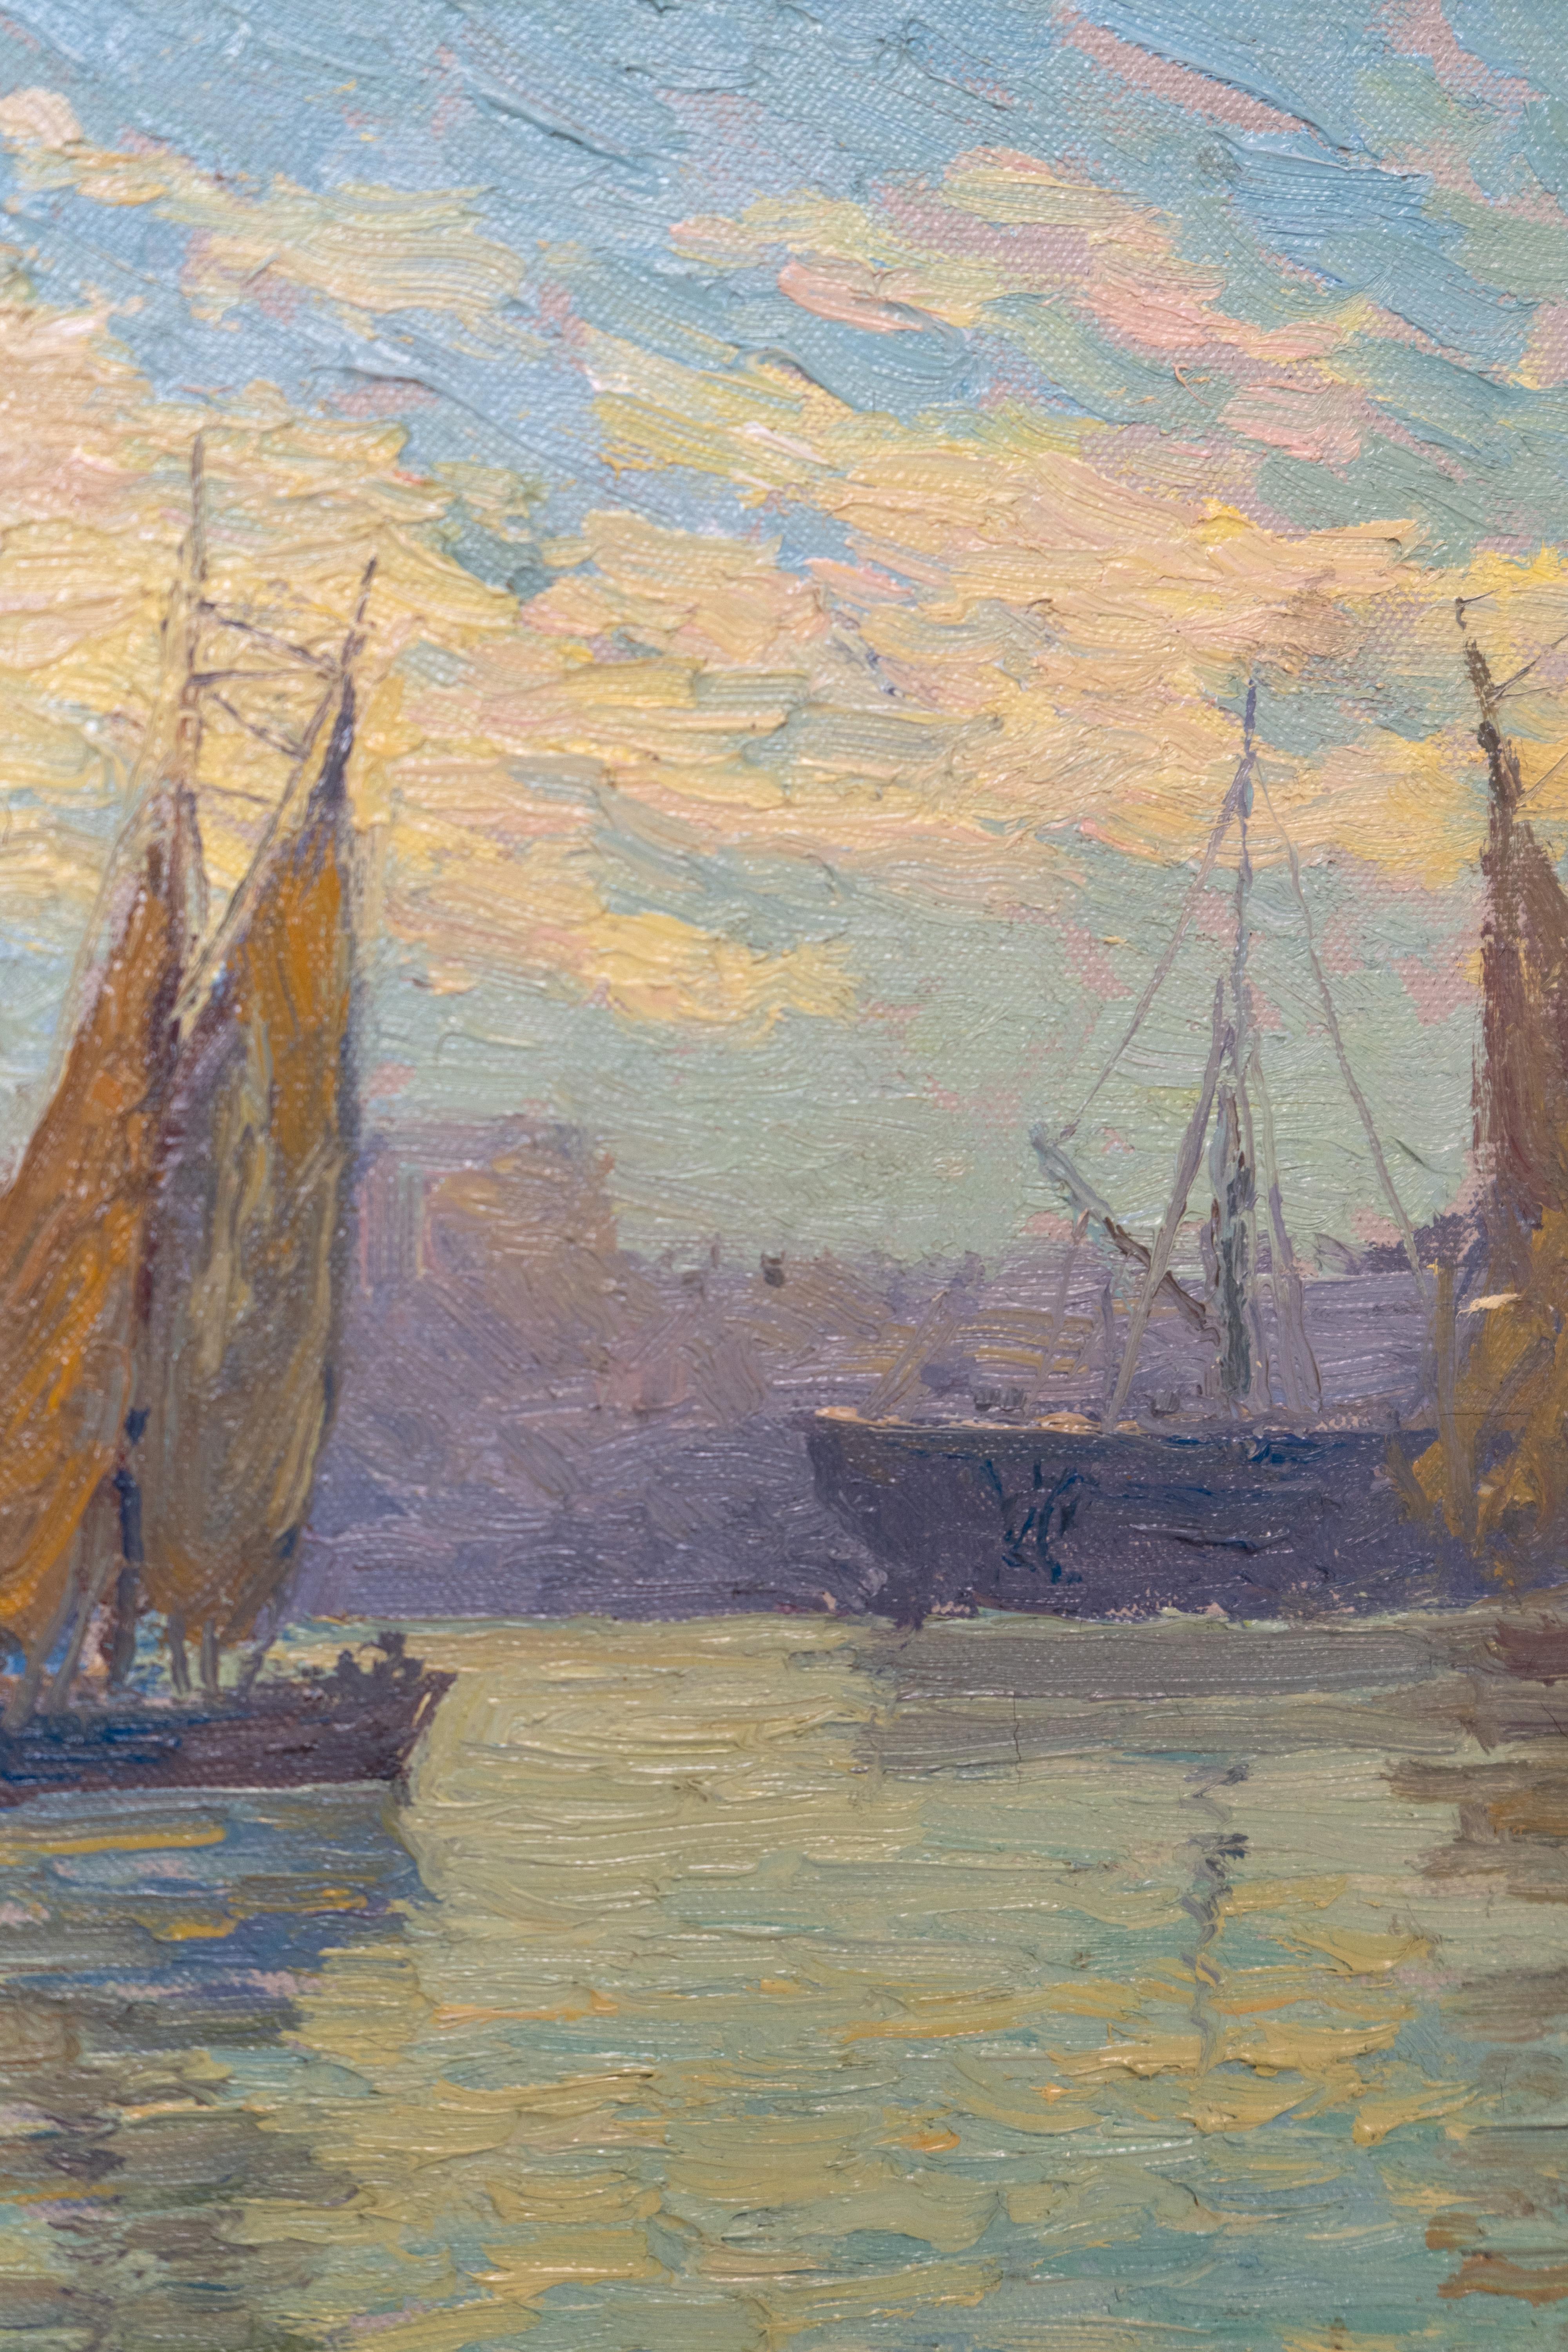 Harbor of Dreams - Painting by James Taylor Harwood